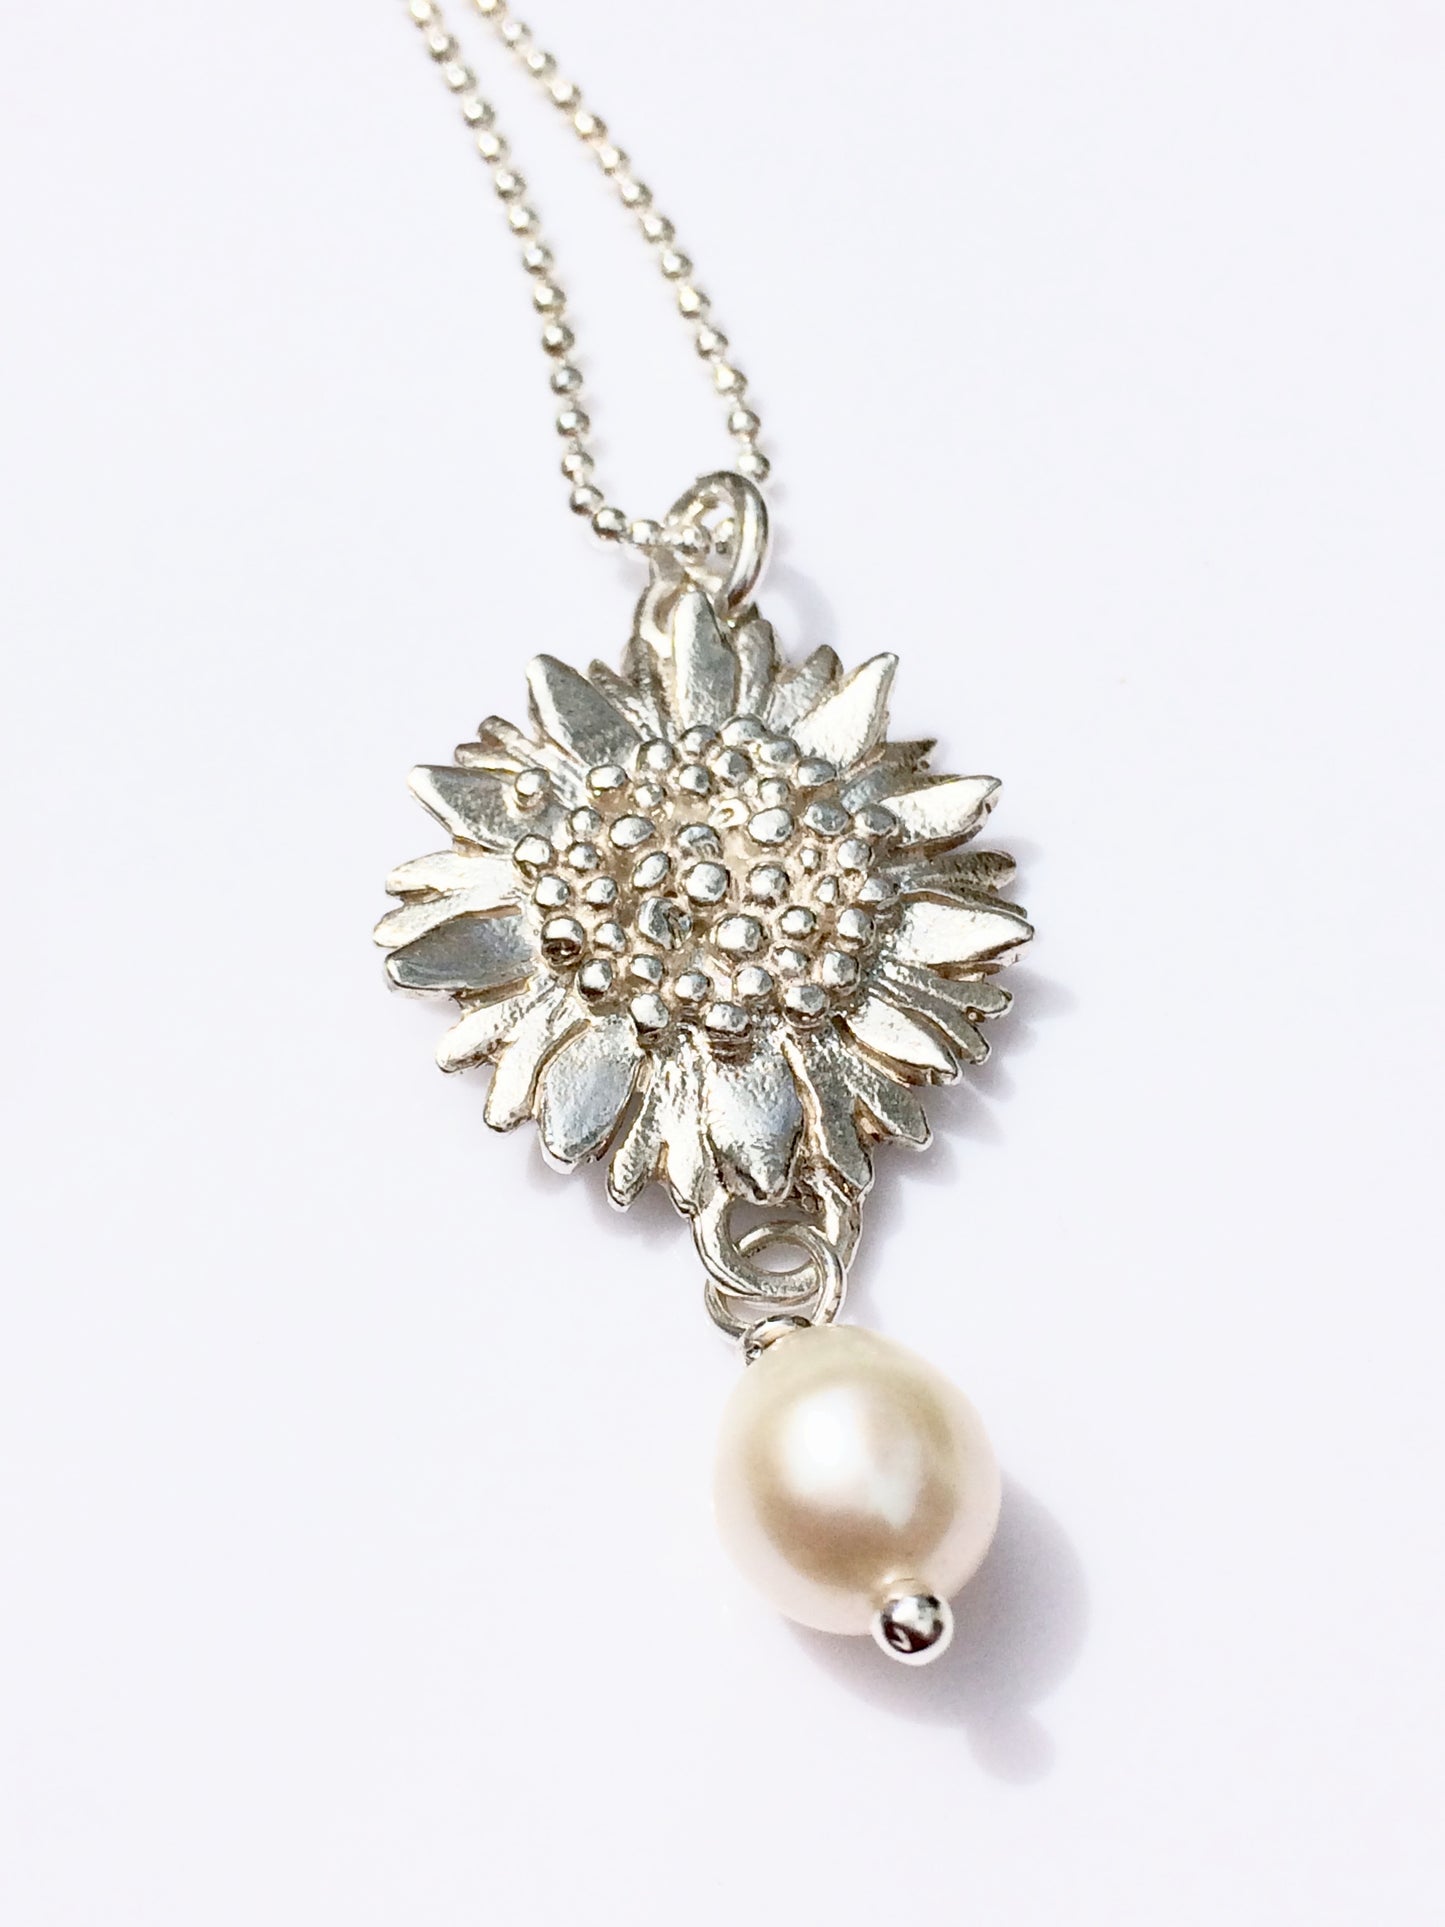 Sunflower necklace with white pearl